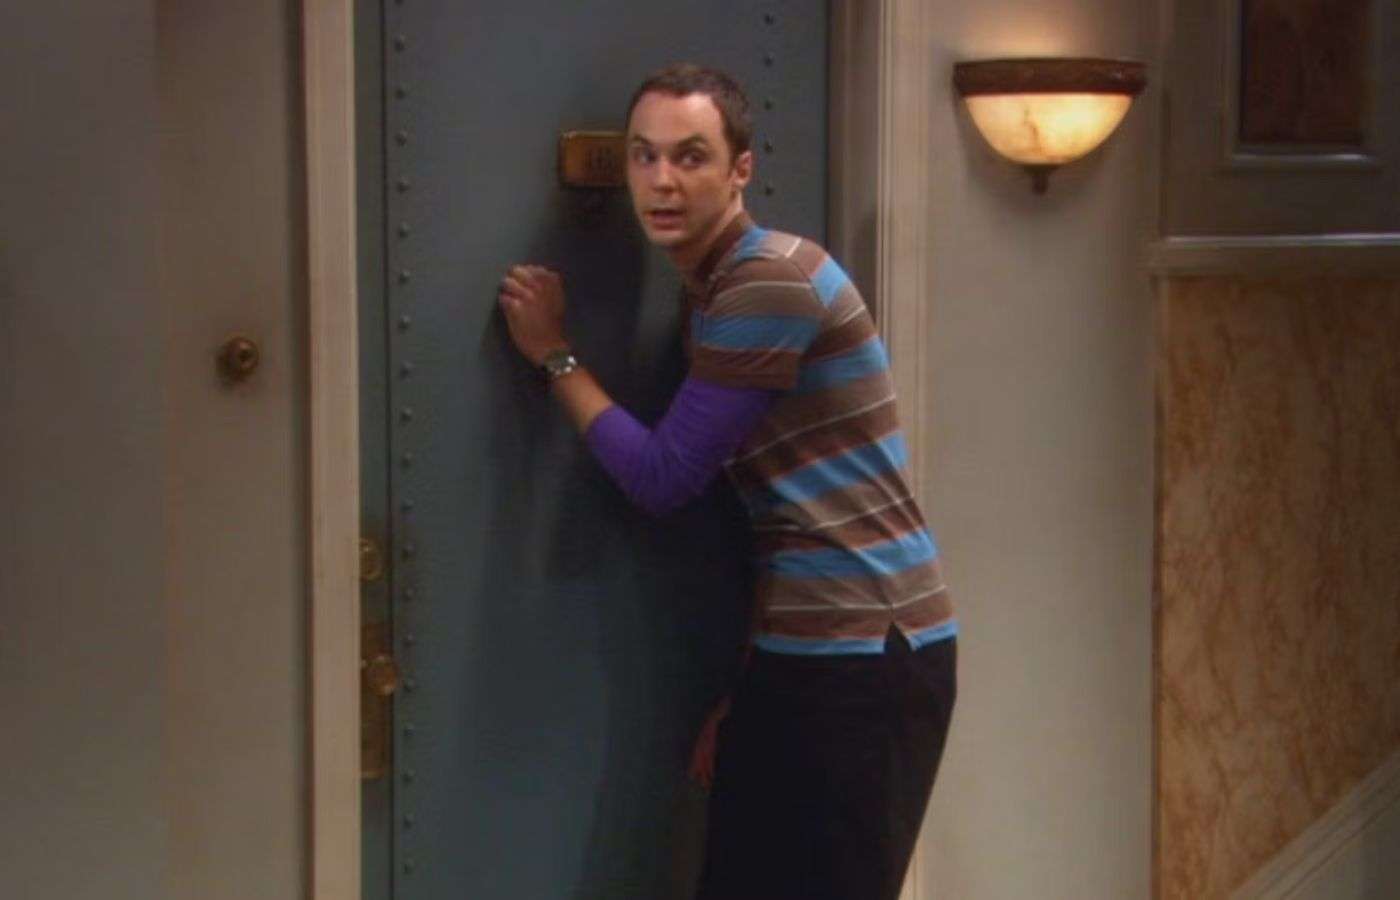 Sheldon Cooper knocking on a door in The Big Bang Theory.